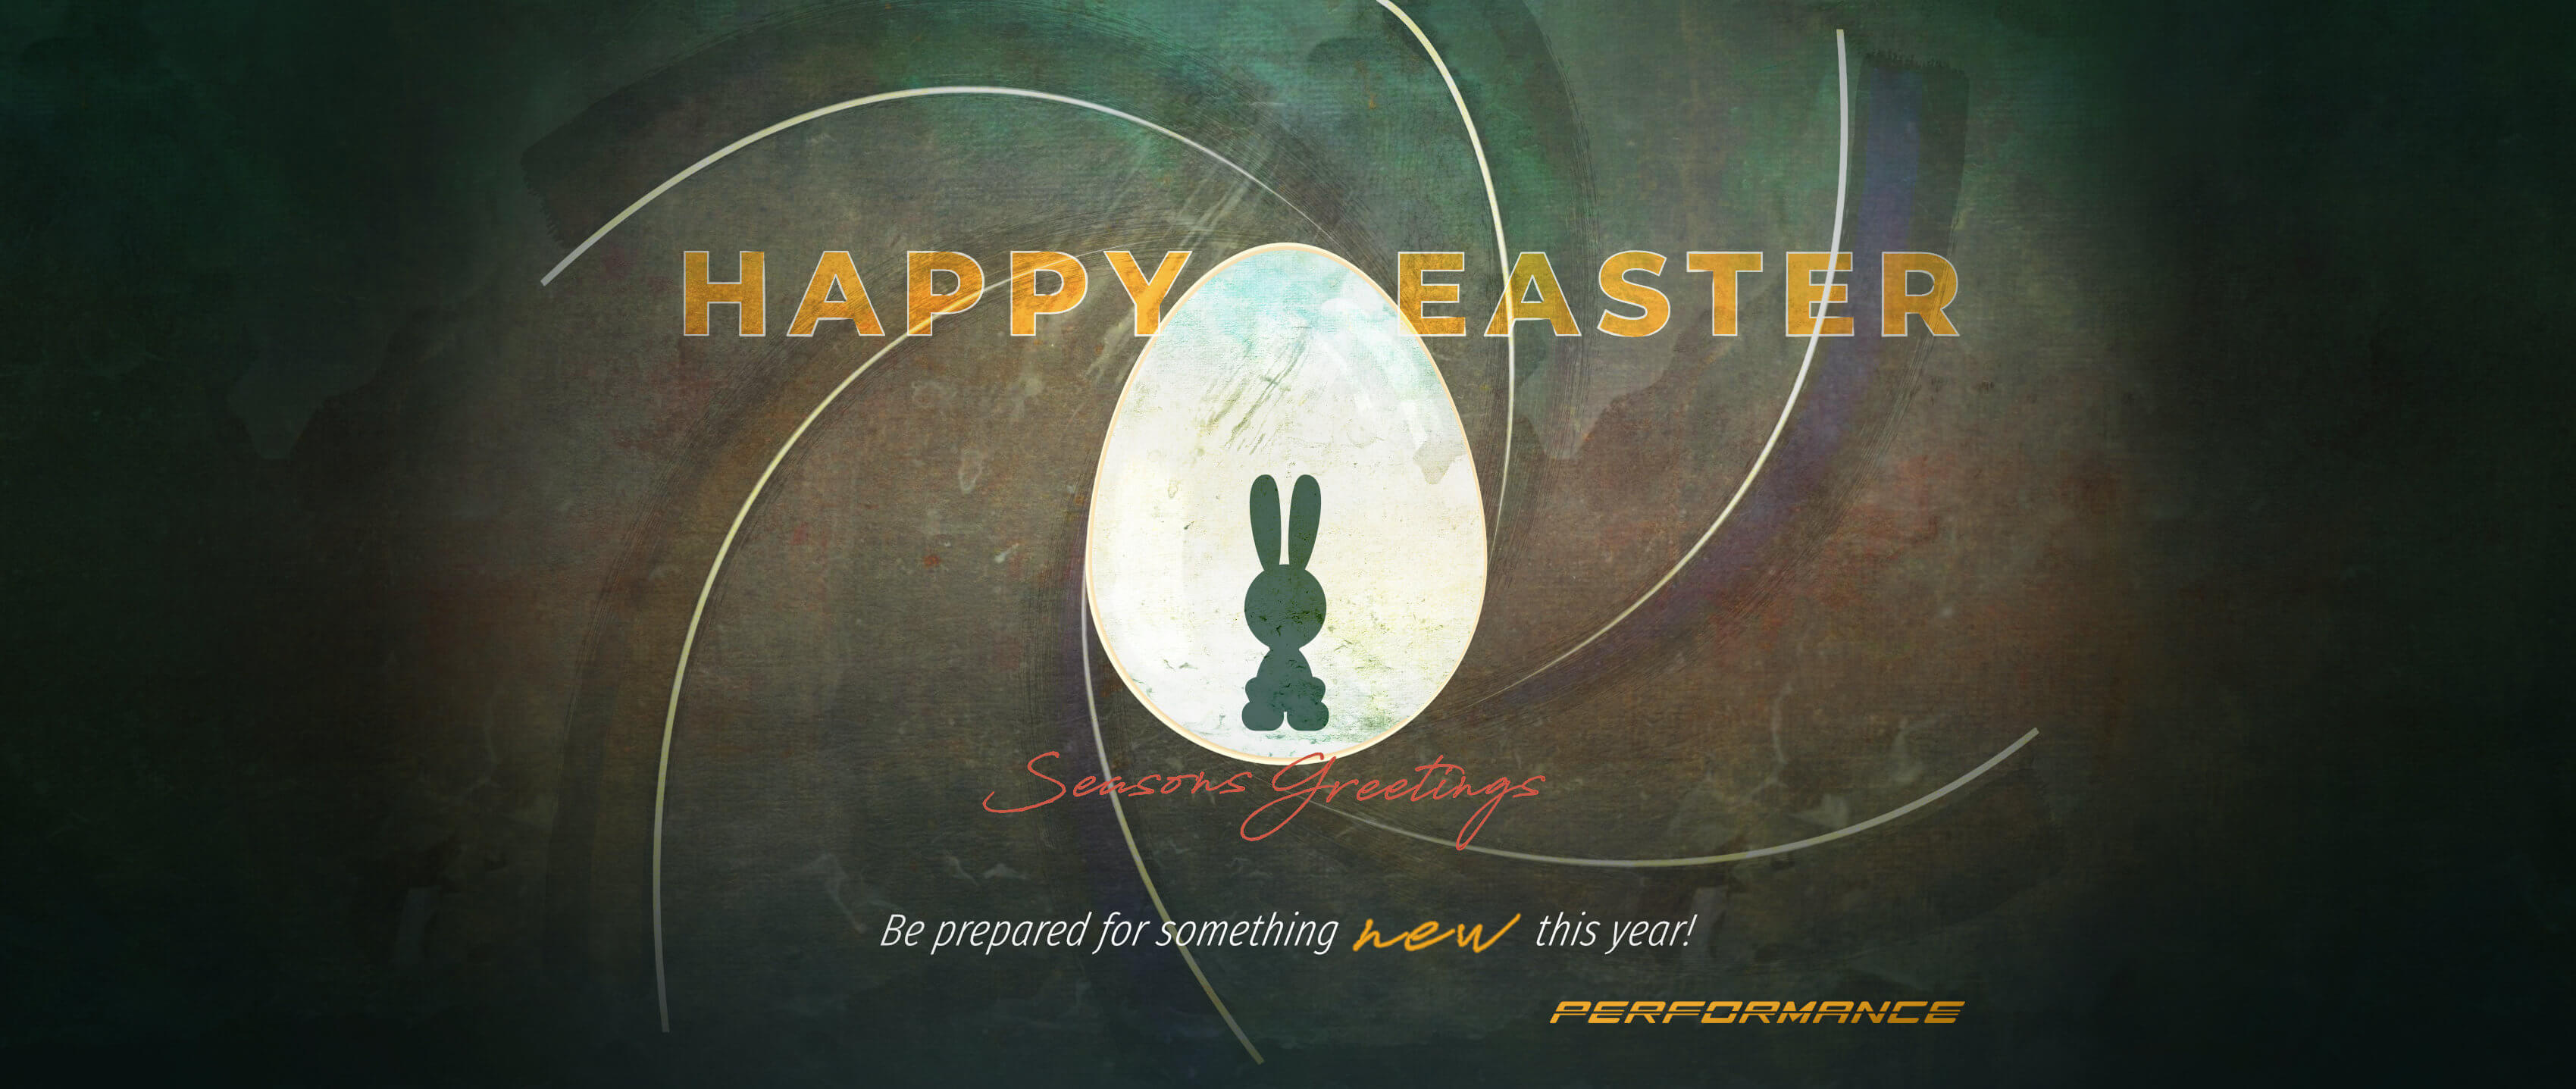 Happy Easter! Season's Greetings. Be prepared for something NEW this year!